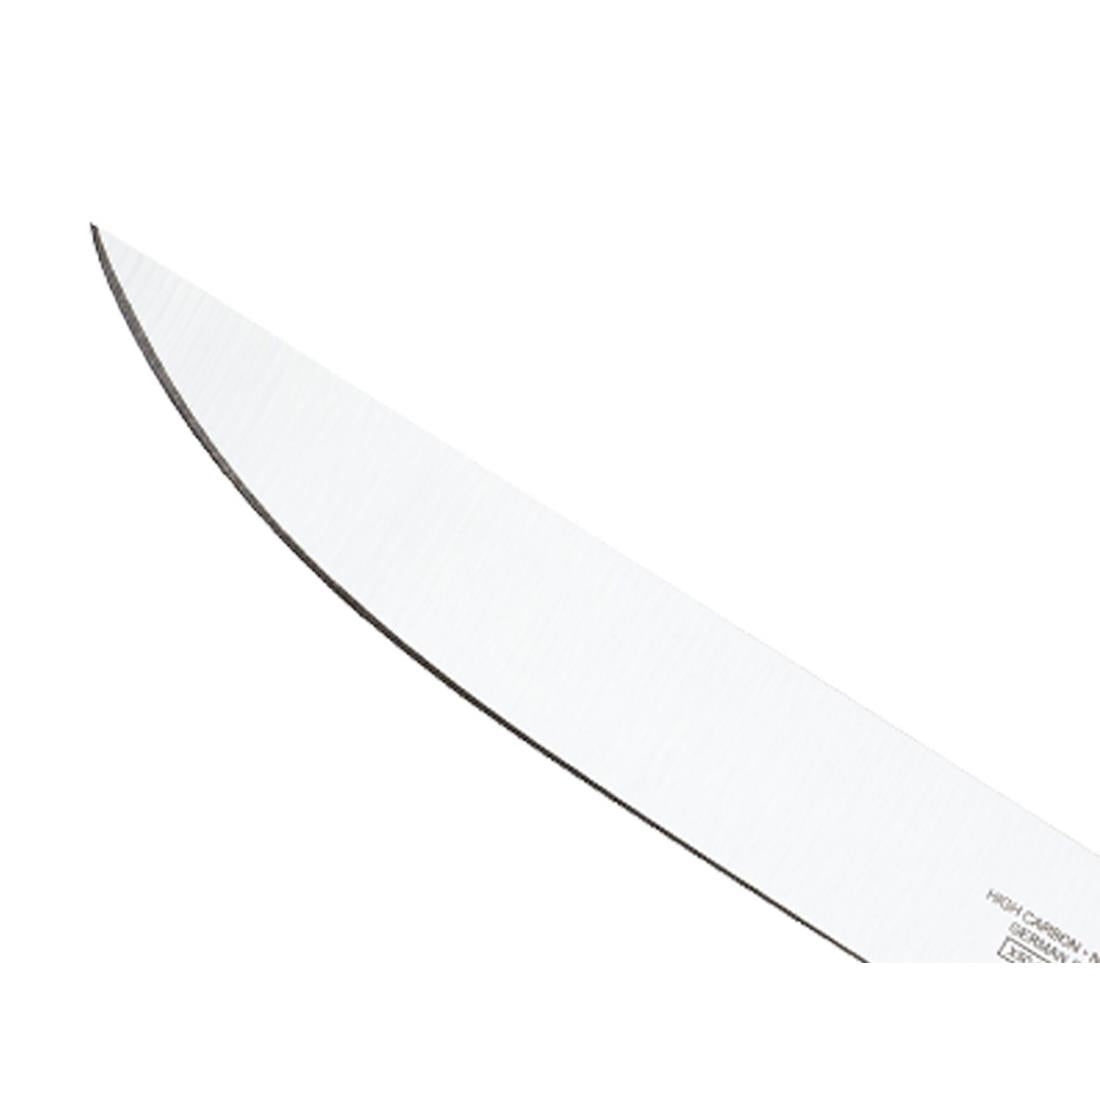 FW712 Mercer Culinary Genesis Precision Forged Boning Knife 15.2cm JD Catering Equipment Solutions Ltd